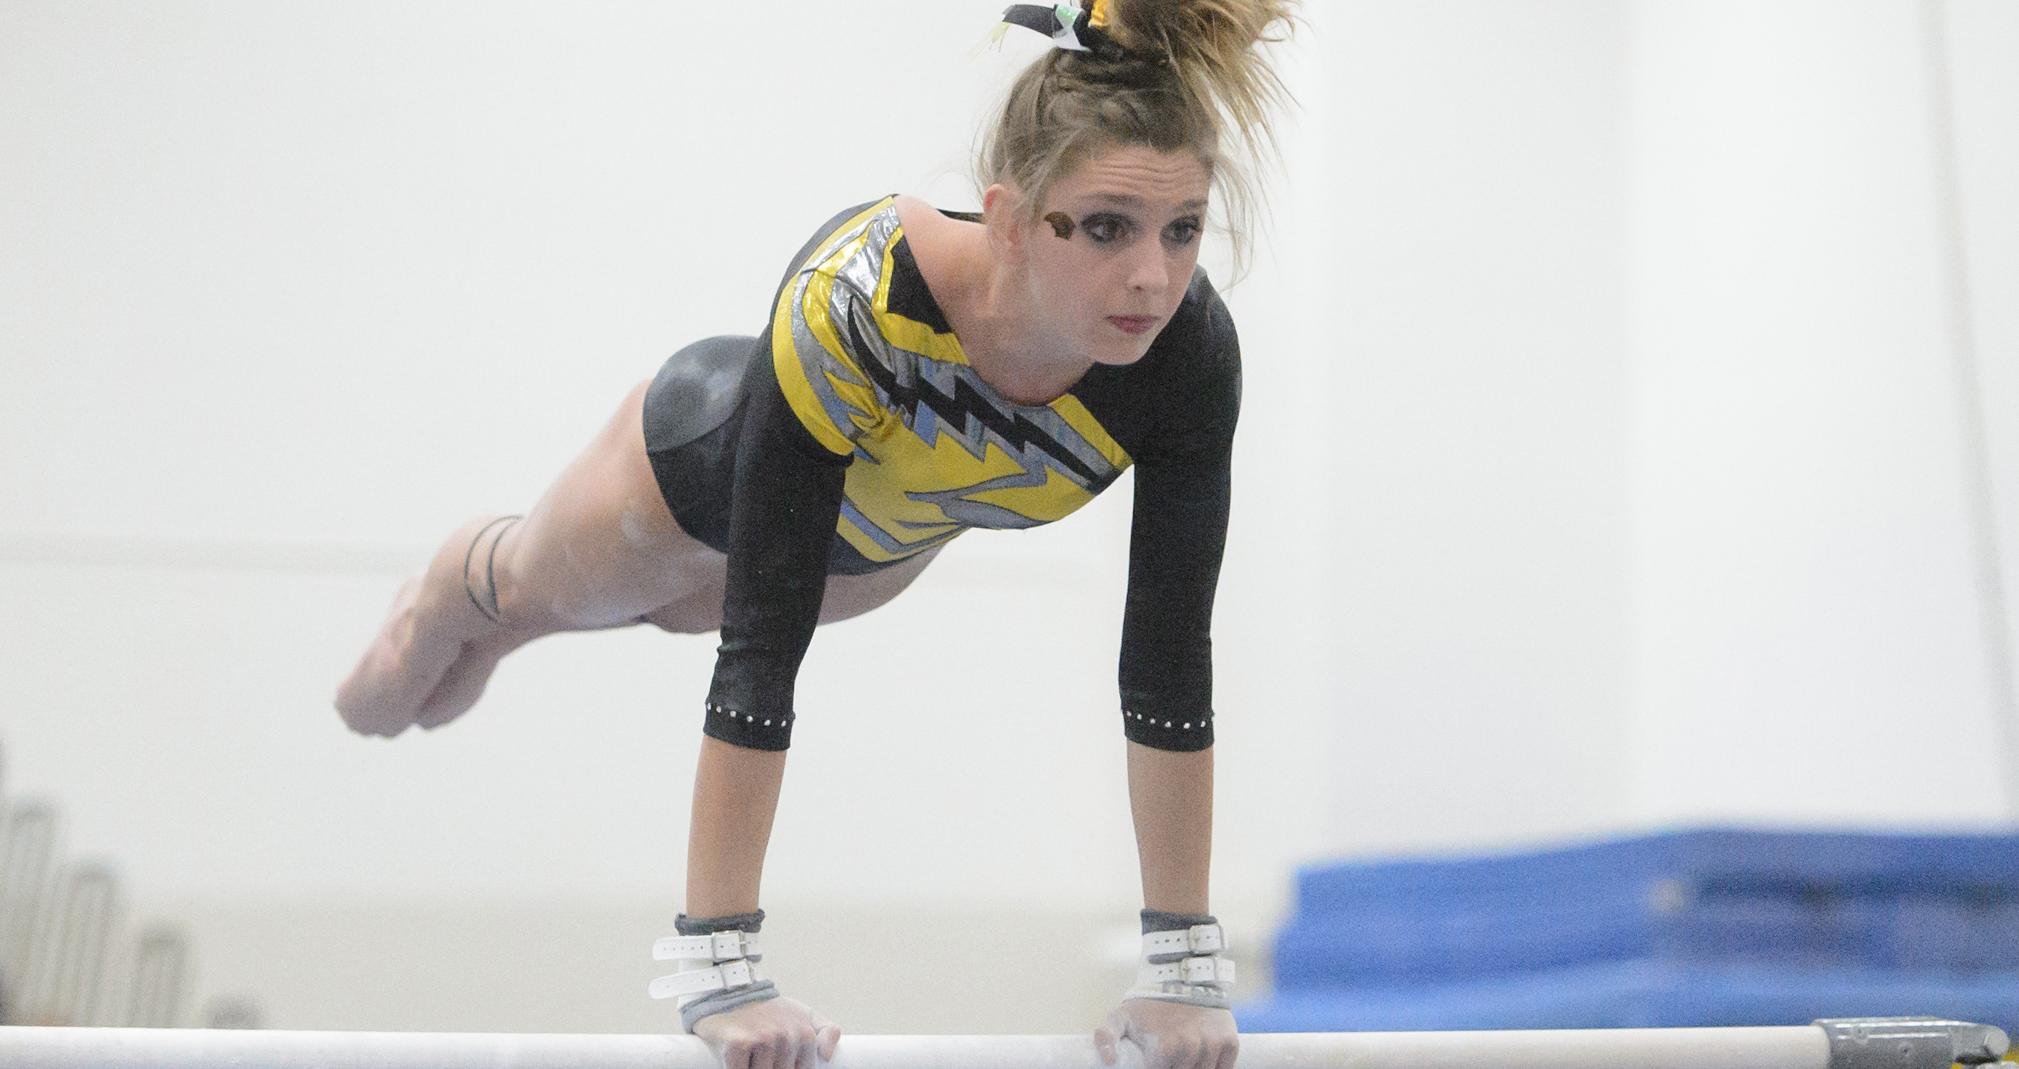 UW-Oshkosh swept the top three places on the uneven bars, including Emily Ryan's second-place listing.